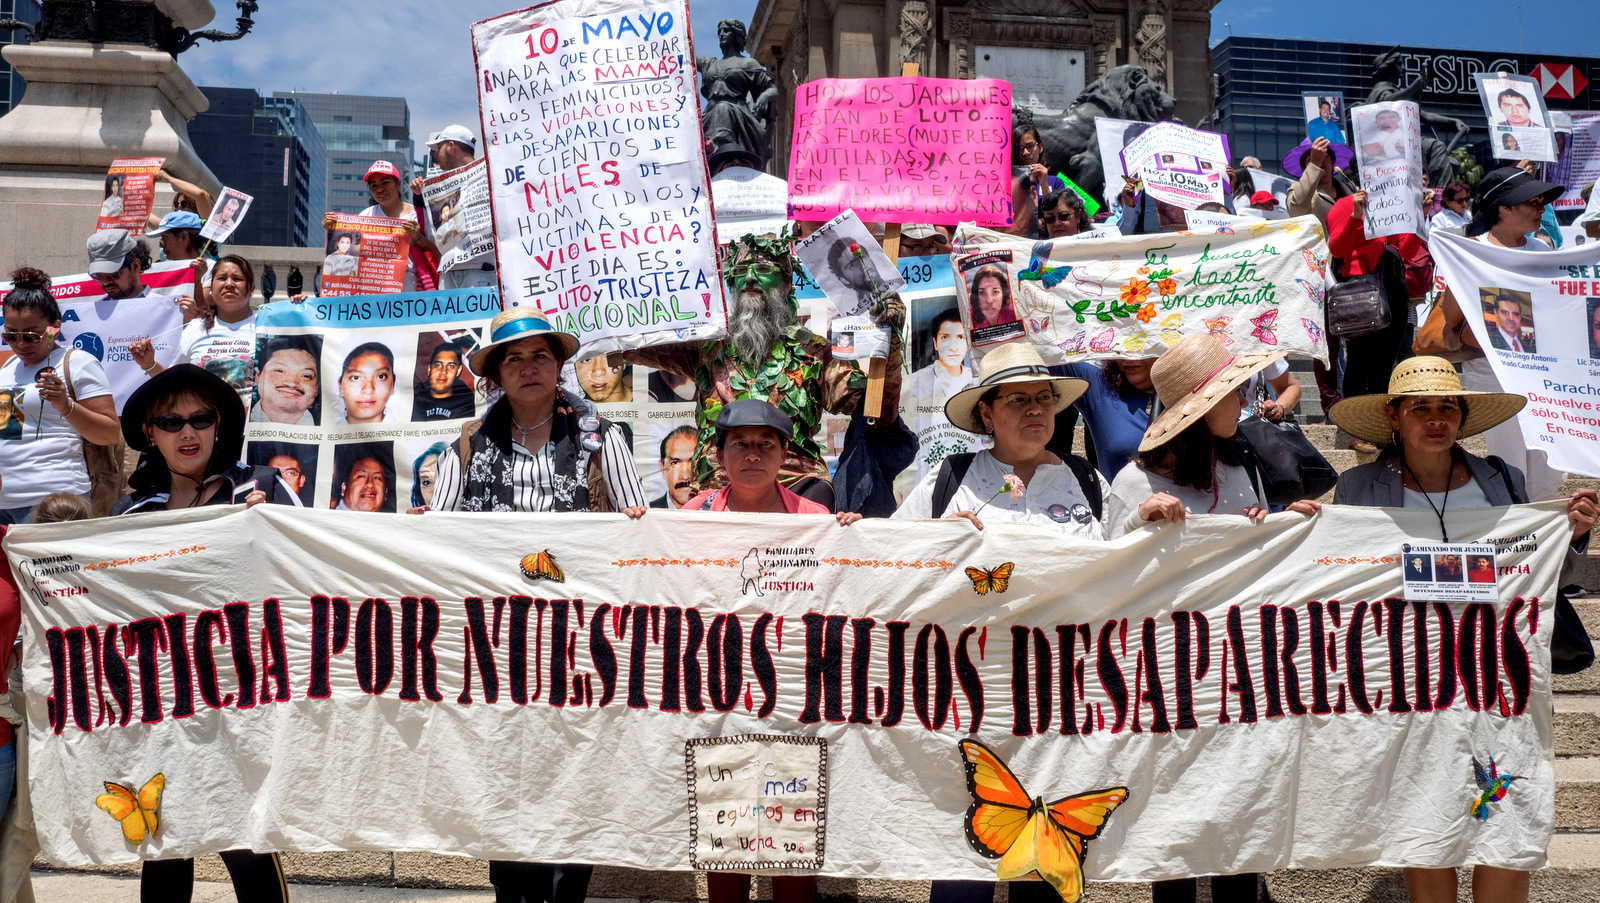 Women hold a sign that reads 'Justice for Our Disappeared Children' on Mother's Day to demand justice for their disappeared children, Mexico City, May 10, 2018. (Photo: José Luis Granados Ceja)